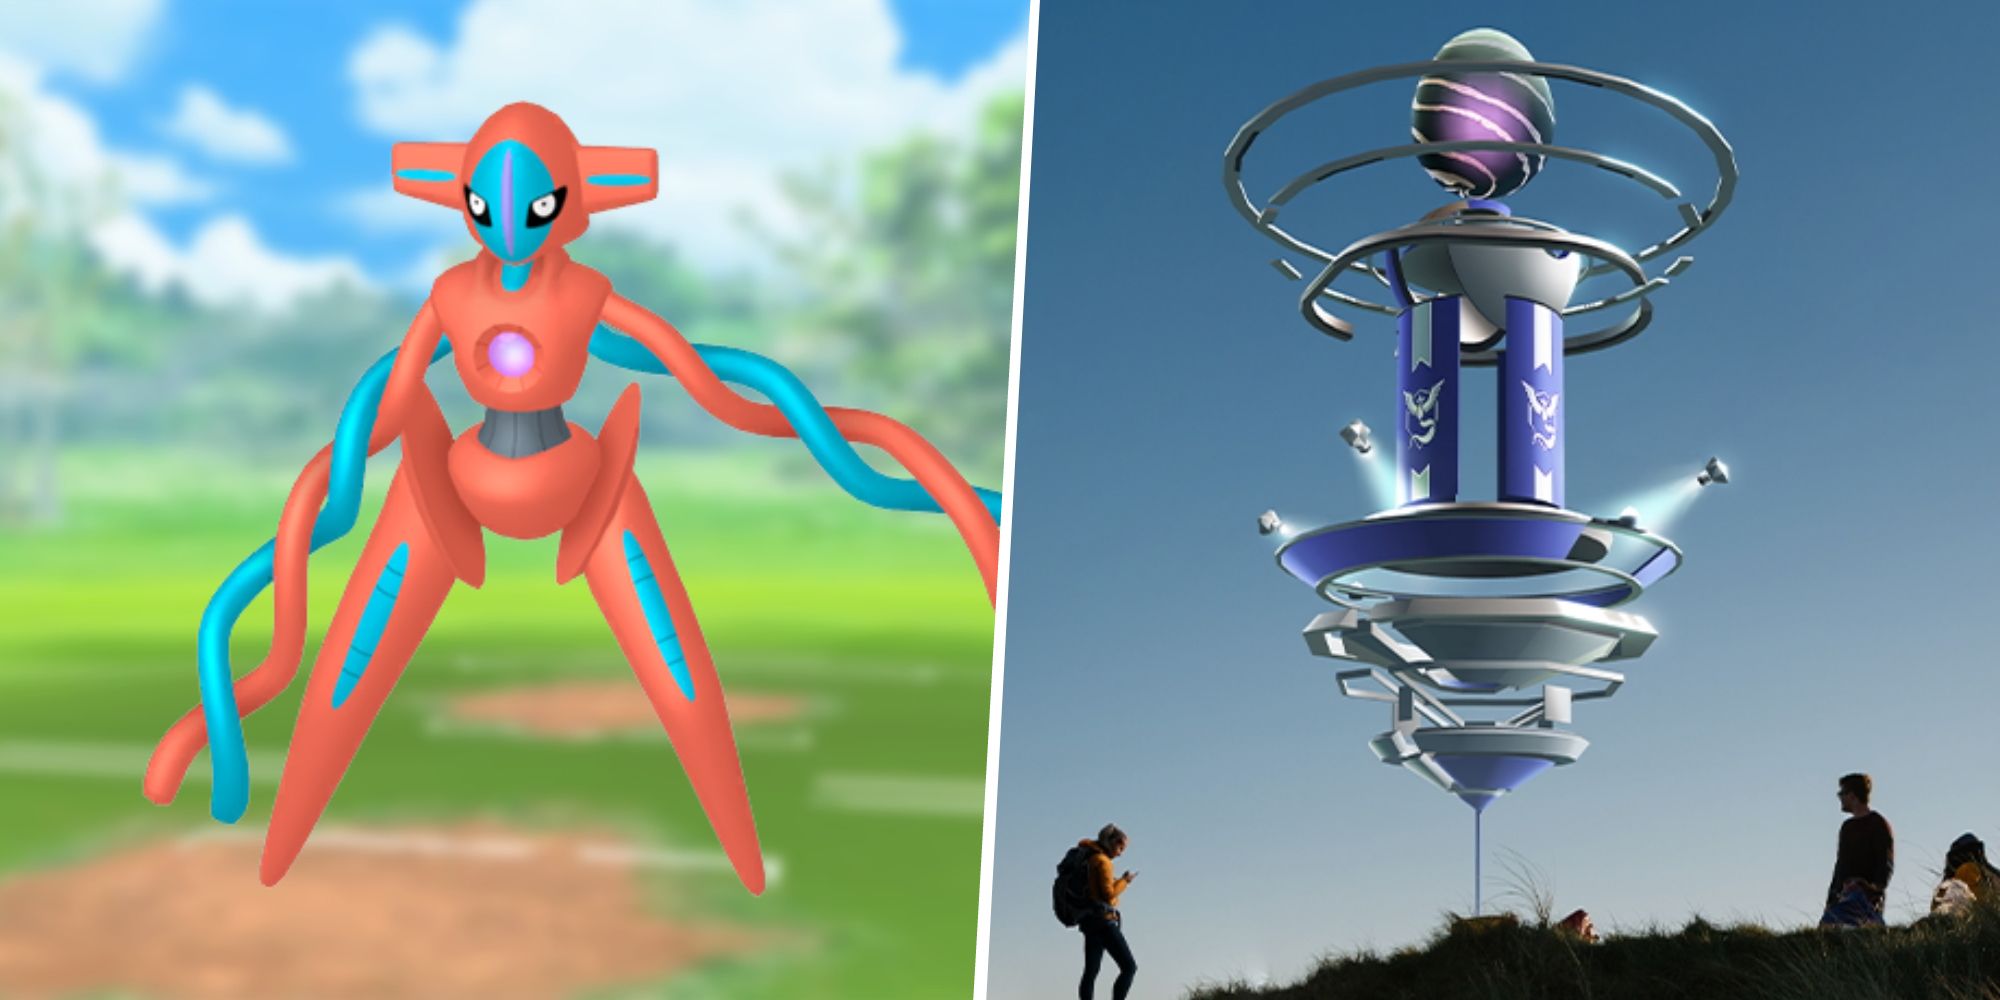 Pokémon Go Deoxys formes, counters, weaknesses and moveset explained